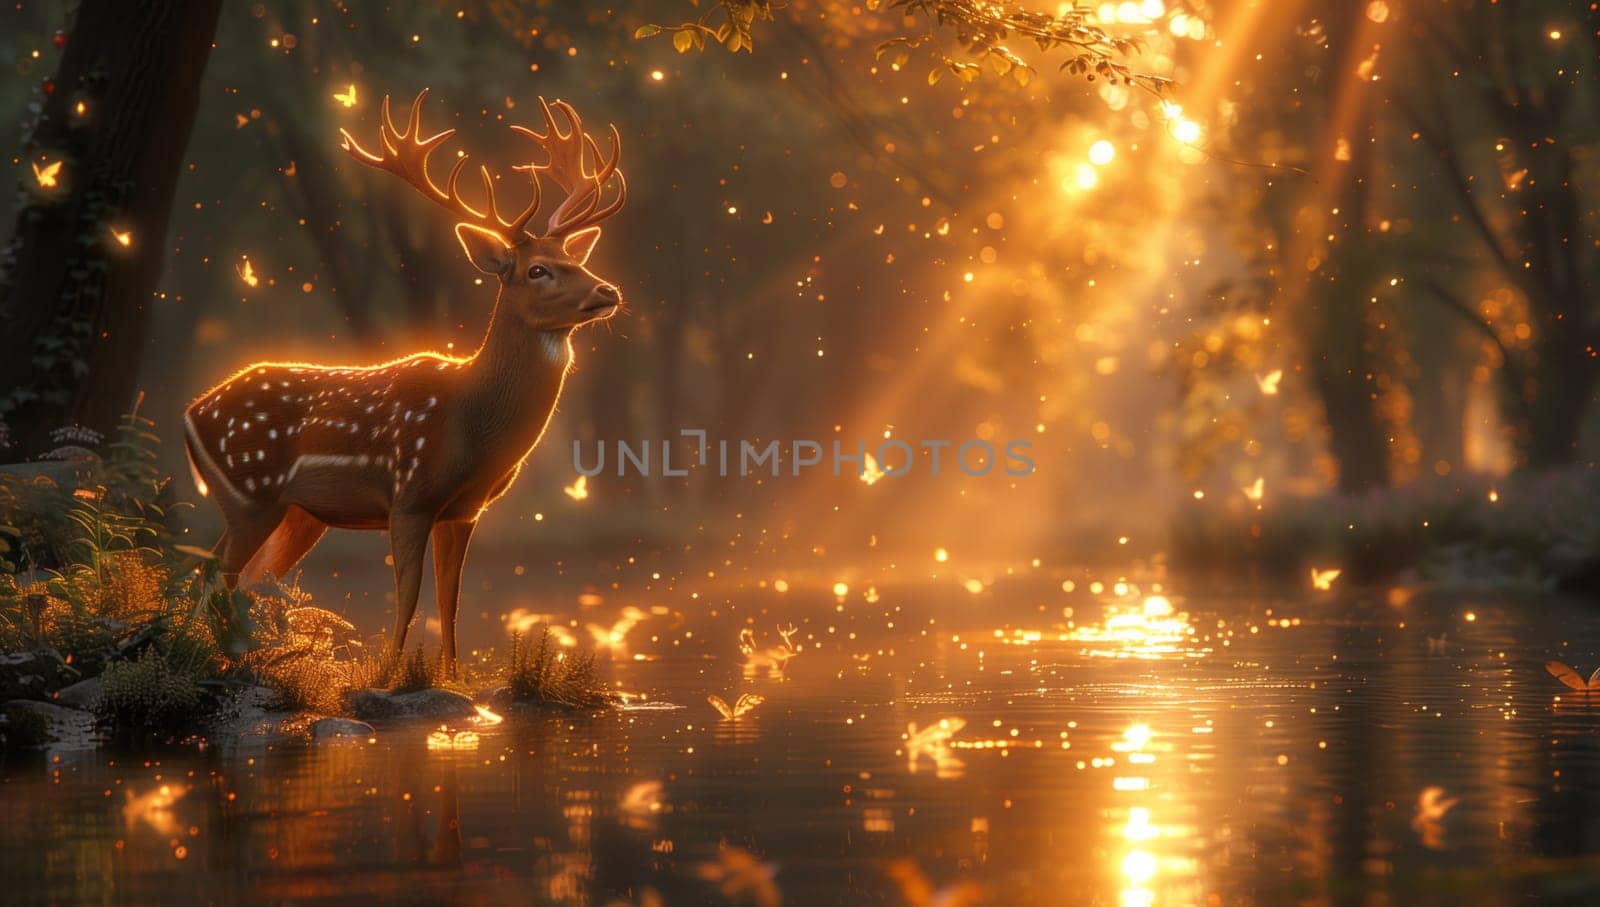 A fawn is standing by the river in the darkness of midnight, surrounded by the natural landscape of a forest. The water glistens in the moonlight, creating a serene scene of wildlife